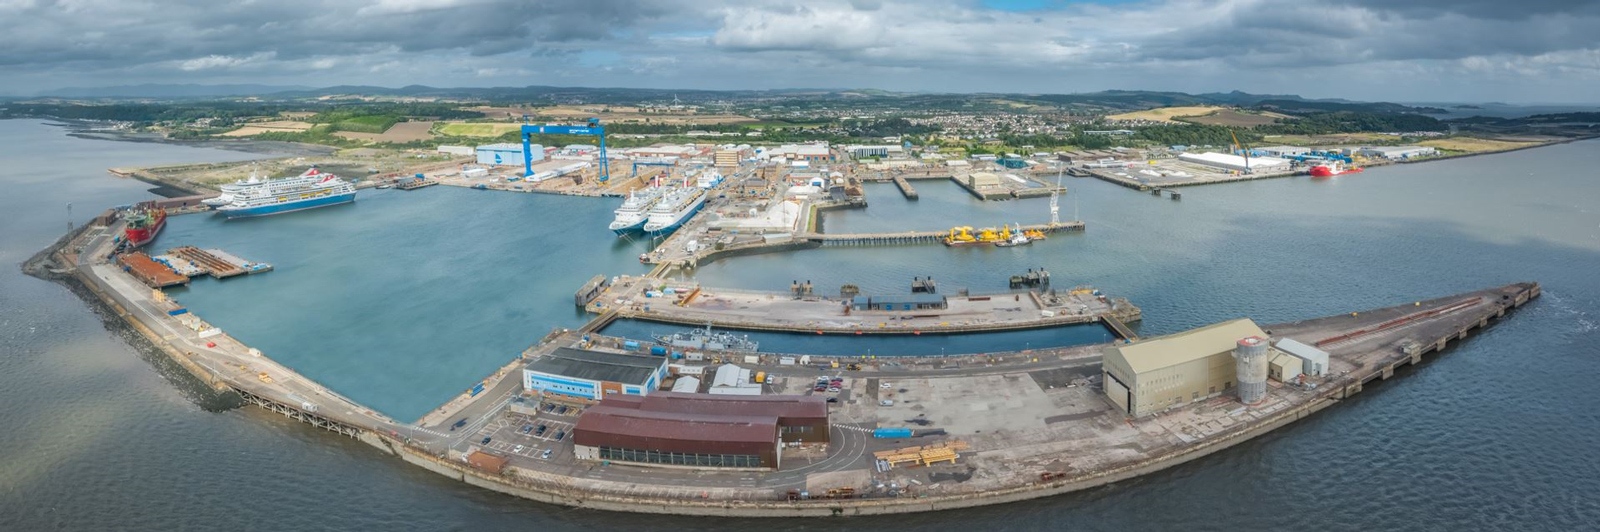 An aerial image of the Babcock facility and dock in Dunfermline looking towards land